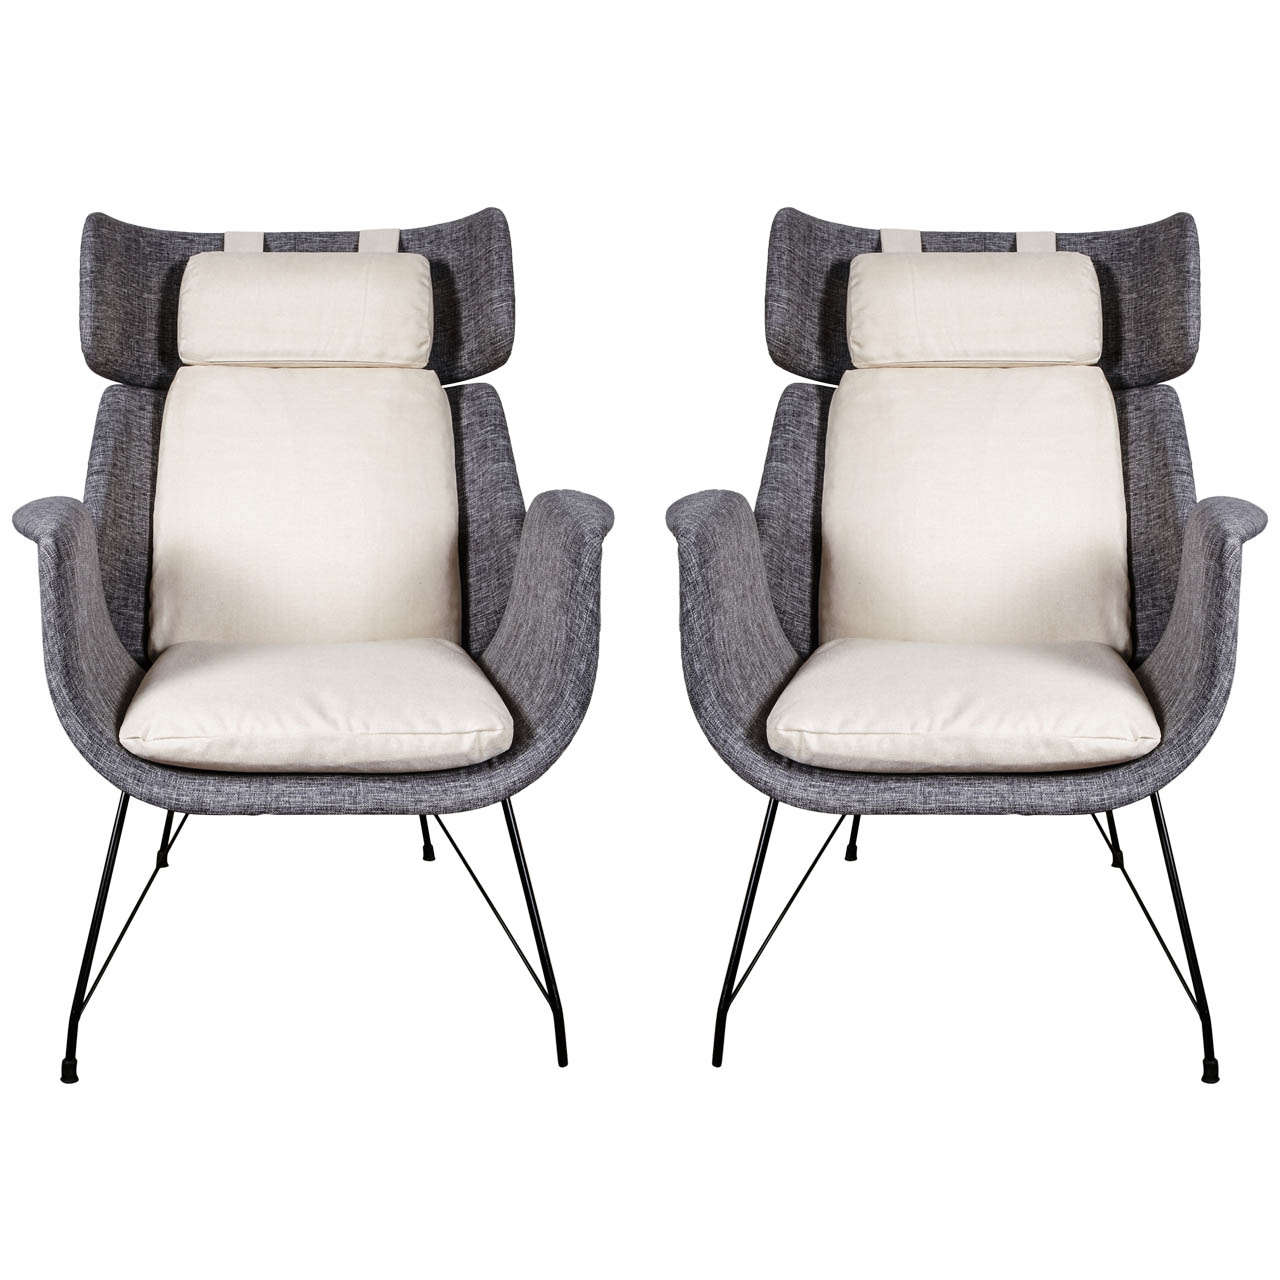 A Rare Pair of Lounge Chairs Designed by Augusto Bozzi for Saporiti